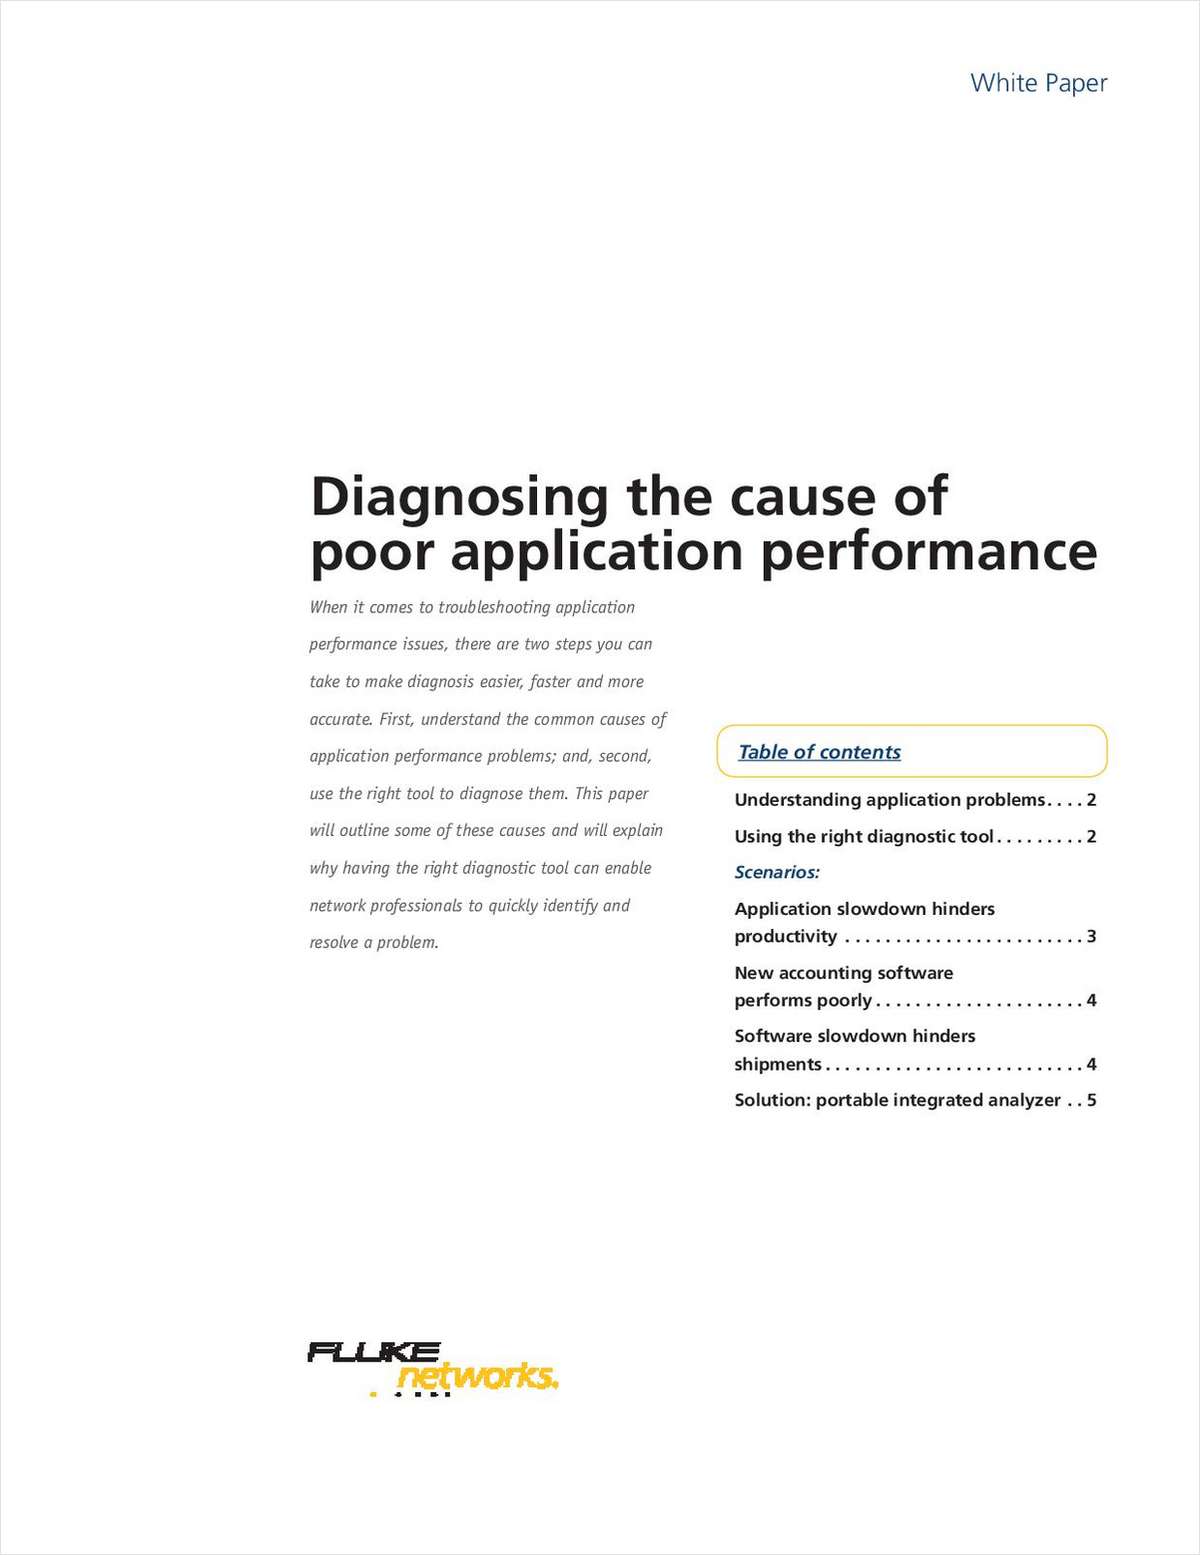 Diagnosing the Cause of Poor Application Performance